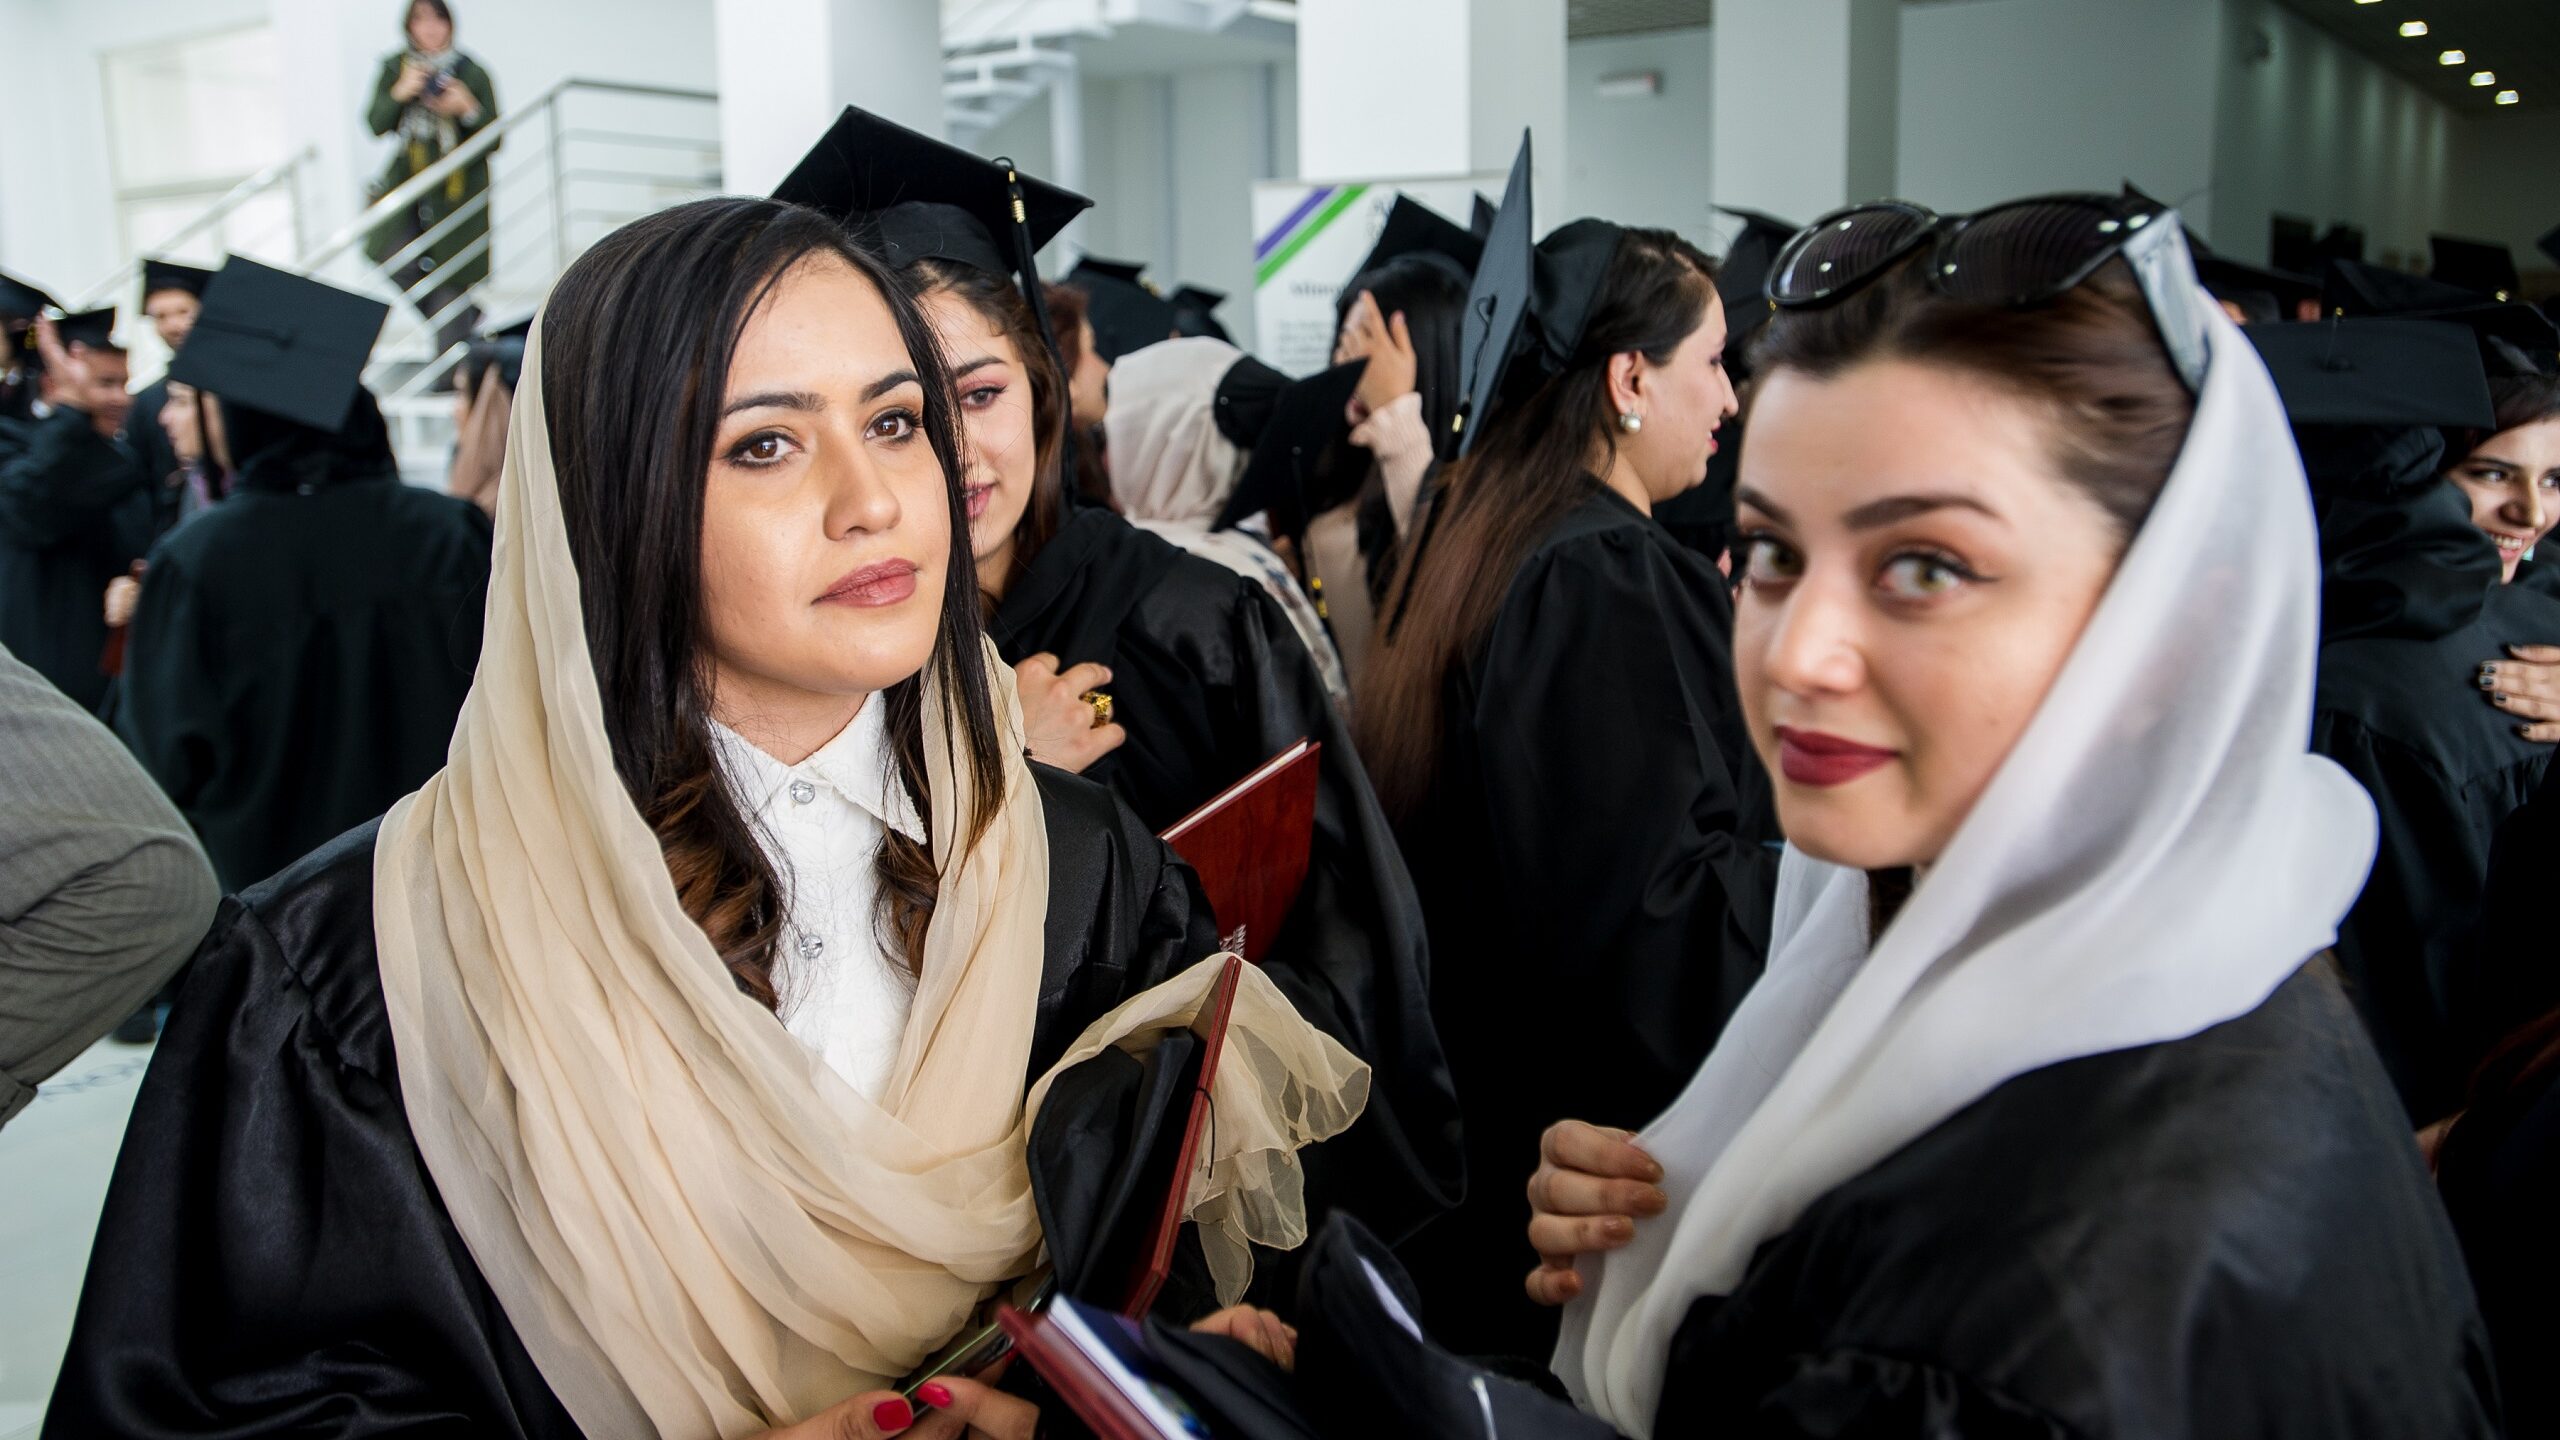 American University of Afghanistan Is a University in Exile